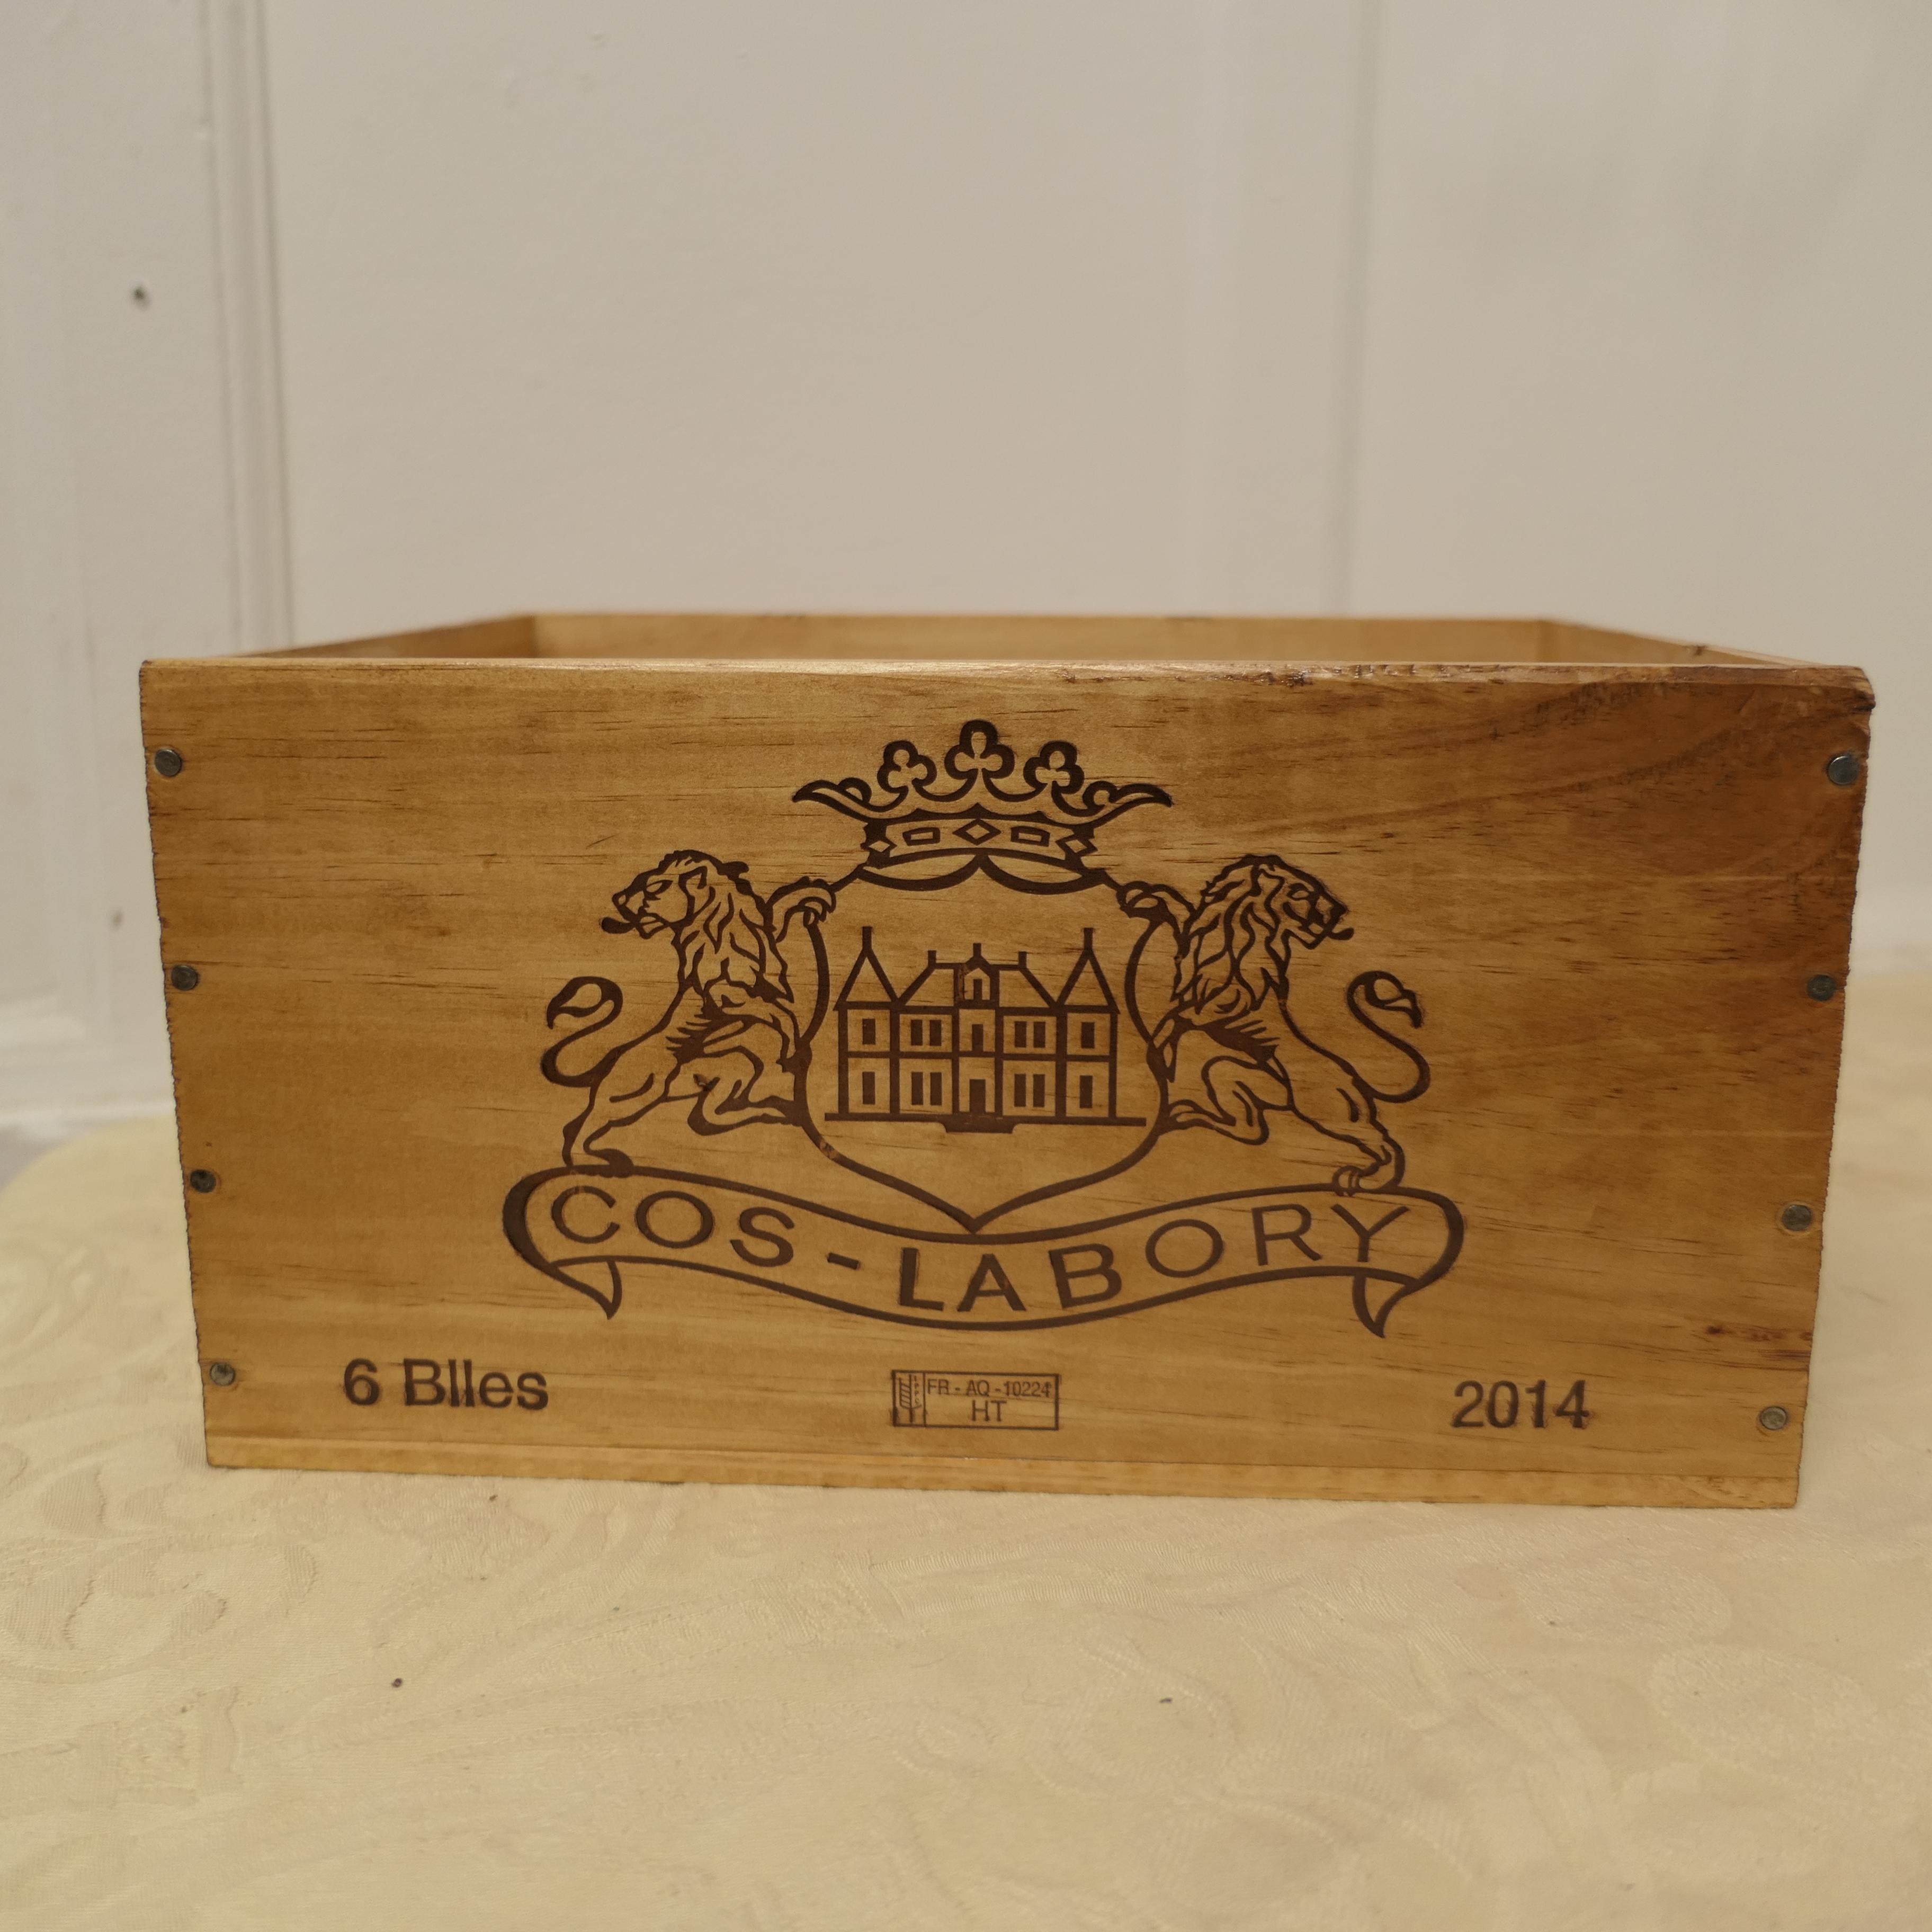  Bespoke Wine Box Gift Box, Tidy, Hamper, Caddy

This attractive piece can be put to many uses, with Christmas and Thanks Giving just around the corner, it would make a great hamper or simple Gift box to set off that special Surprise

Once the